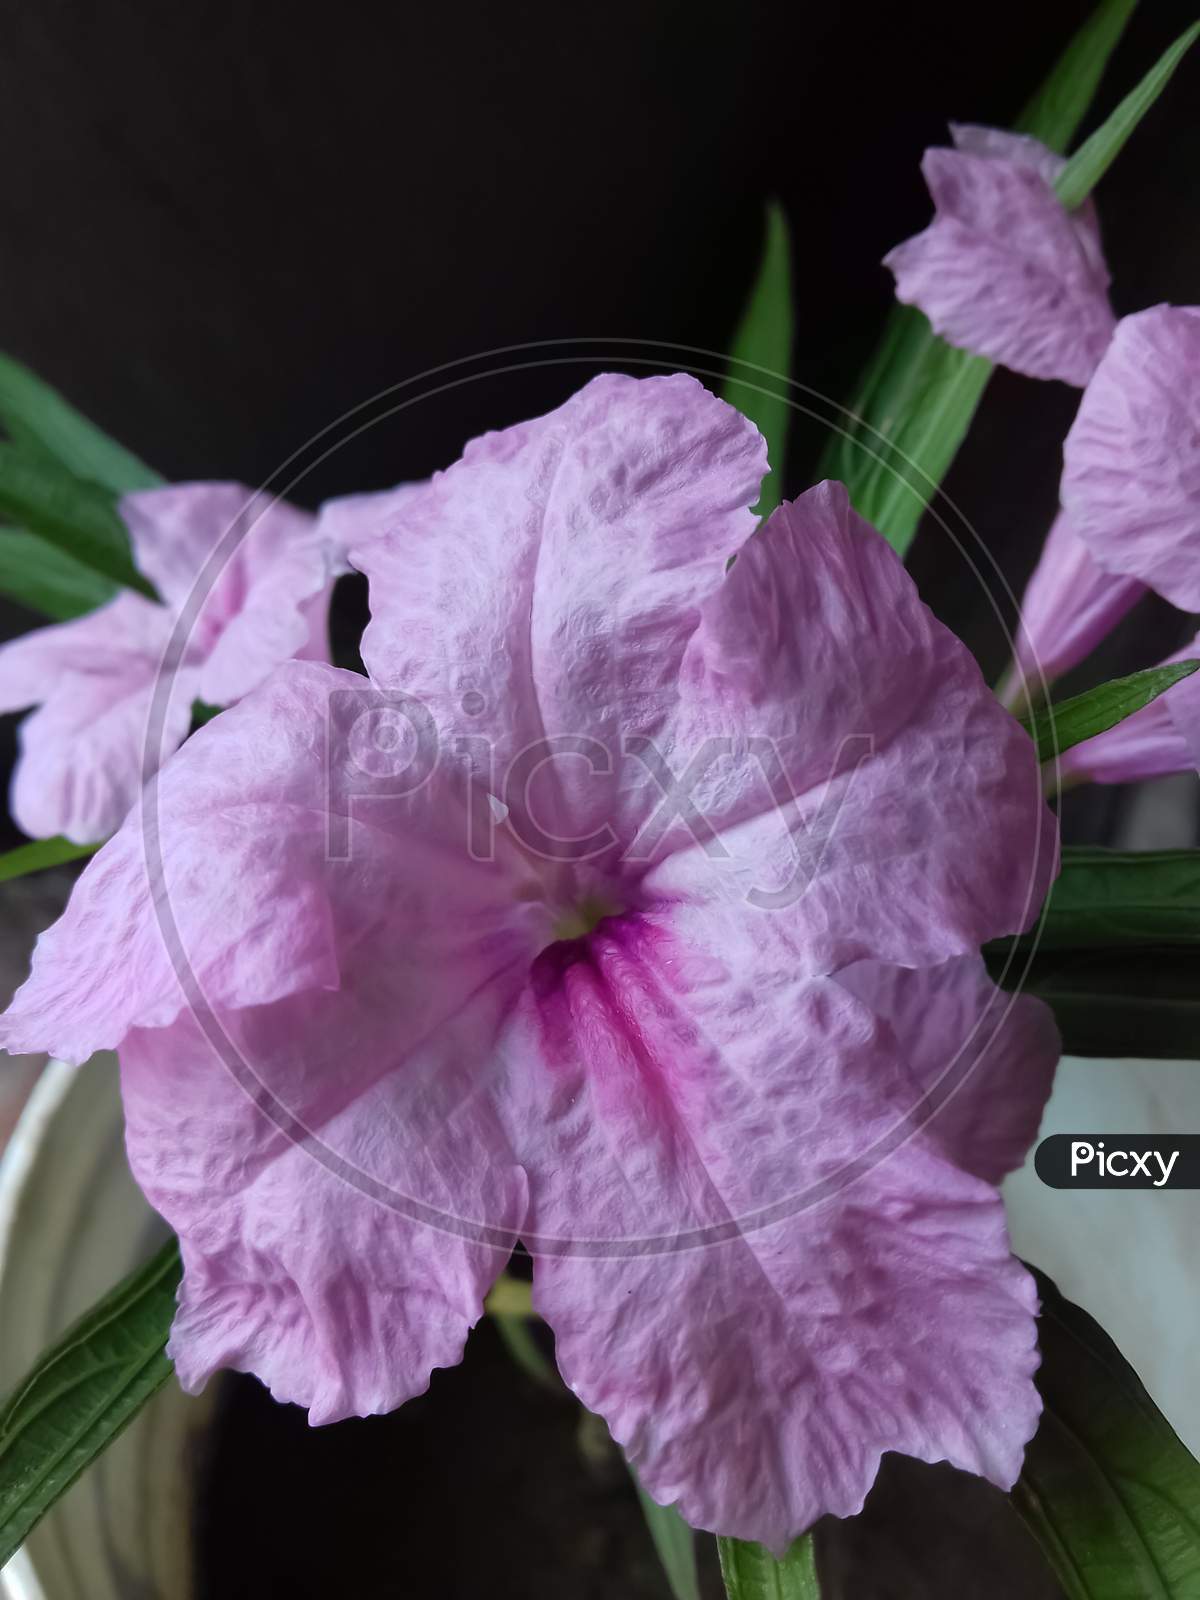 Mexican Petunia Flower Plant Or Ruellia Simplex Or Mexican Bluebell Or Britton'S Wild Petunia Flower Plant, Soft Pink In Color